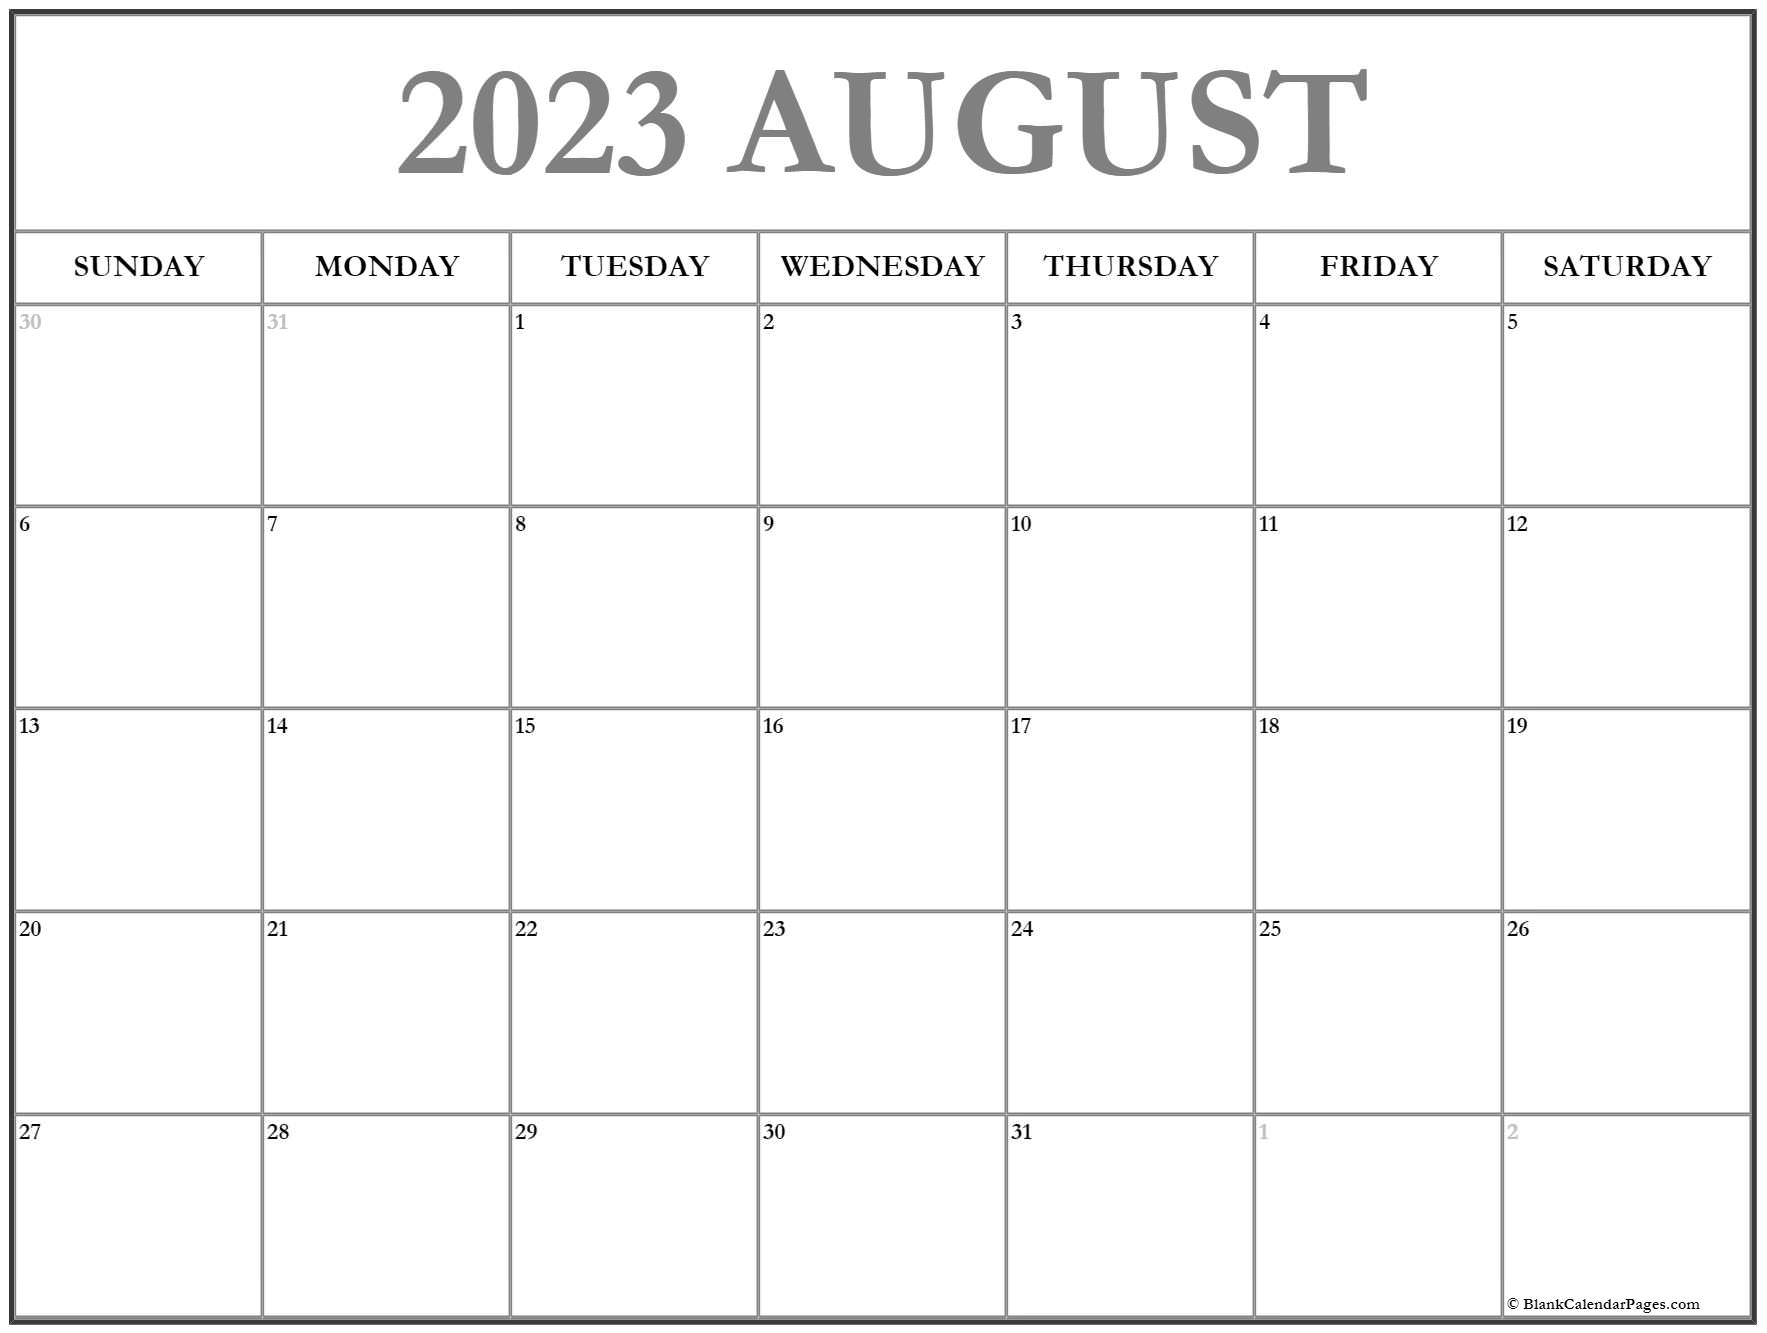 August 2023 Calendar Of The Month Free Printable August Calendar Of 